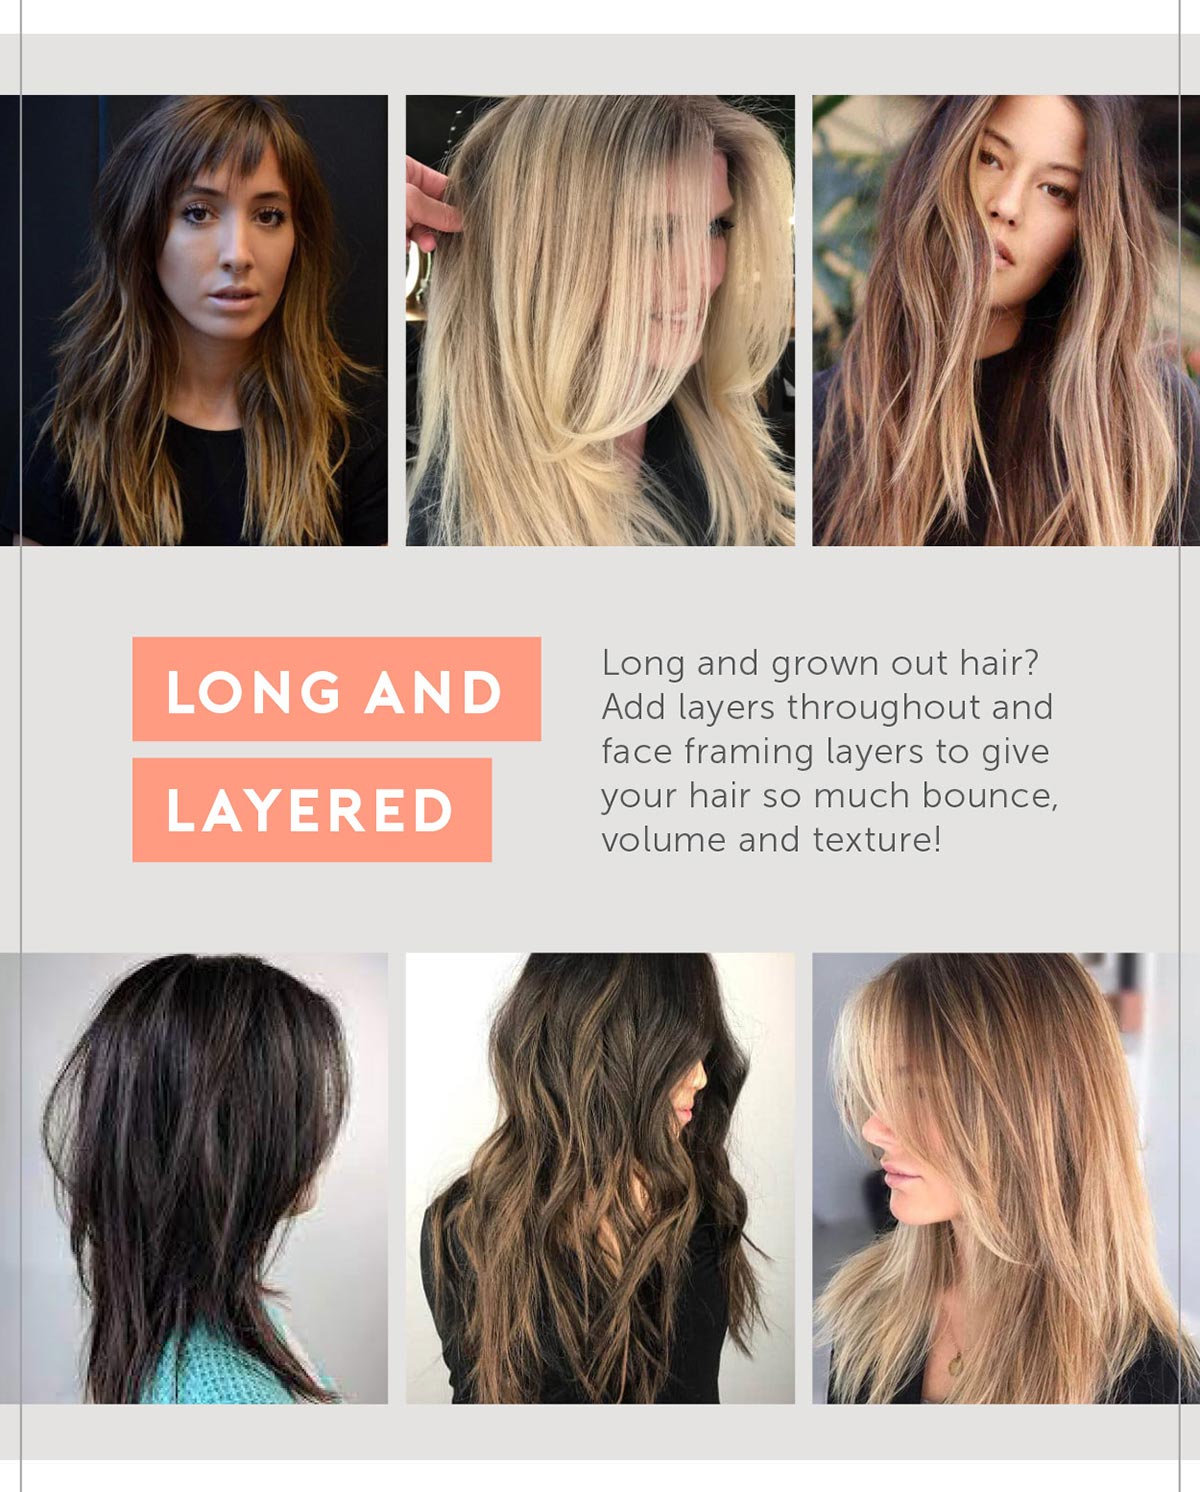 2. Long and Layered Long and grown out hair? Add layers throughout and face framing layers to give your hair so much bounce, volume and texture!